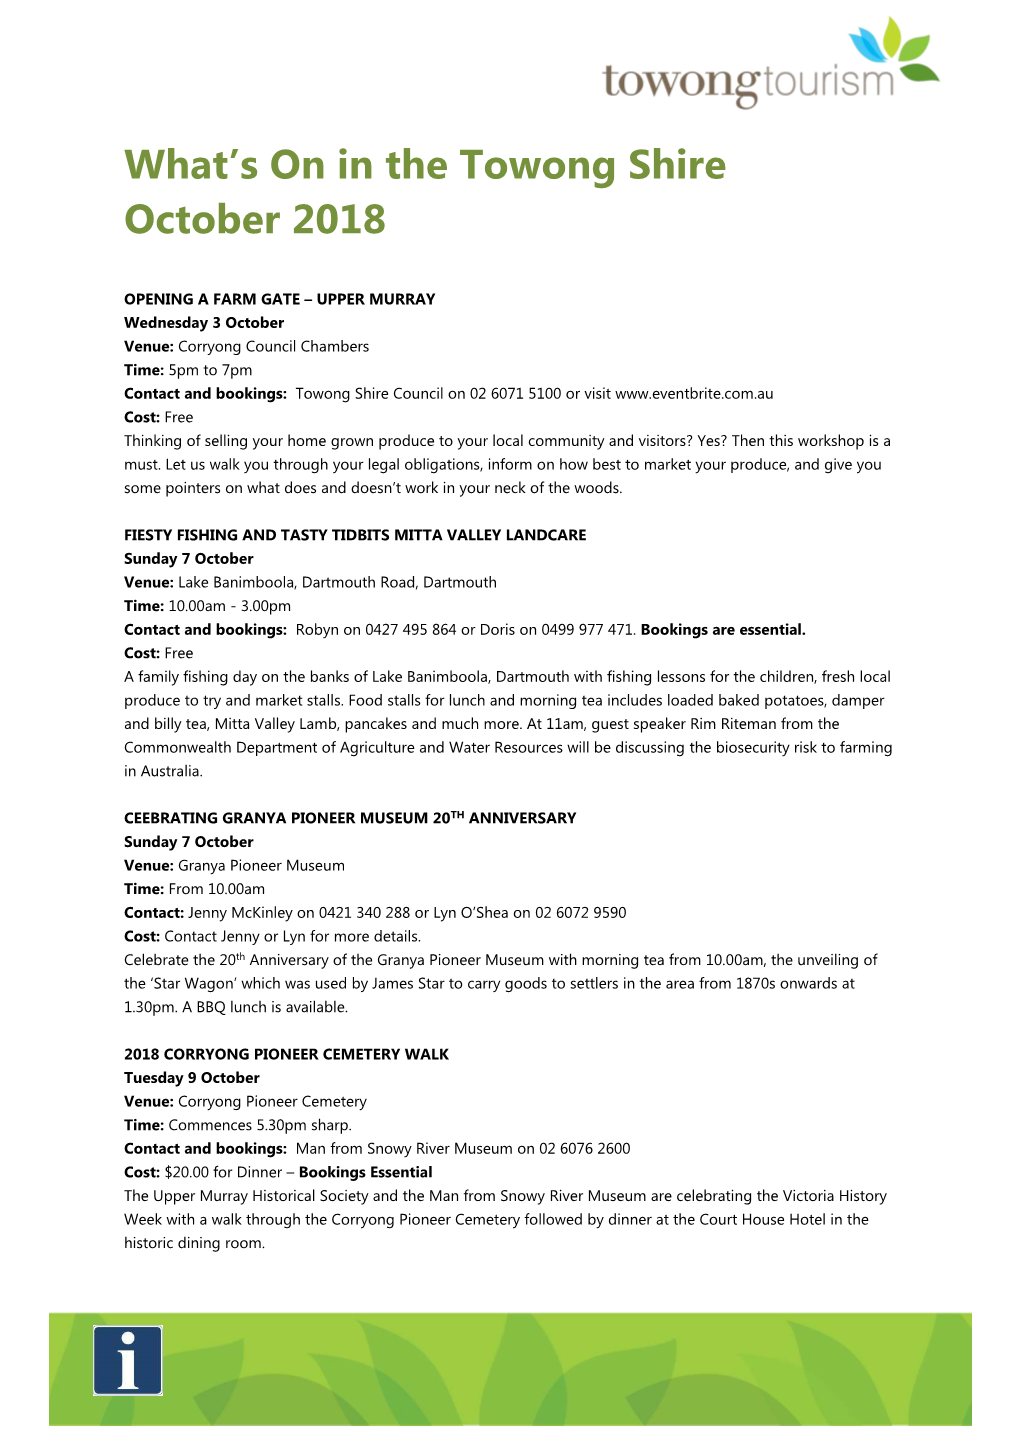 What's on in the Towong Shire October 2018